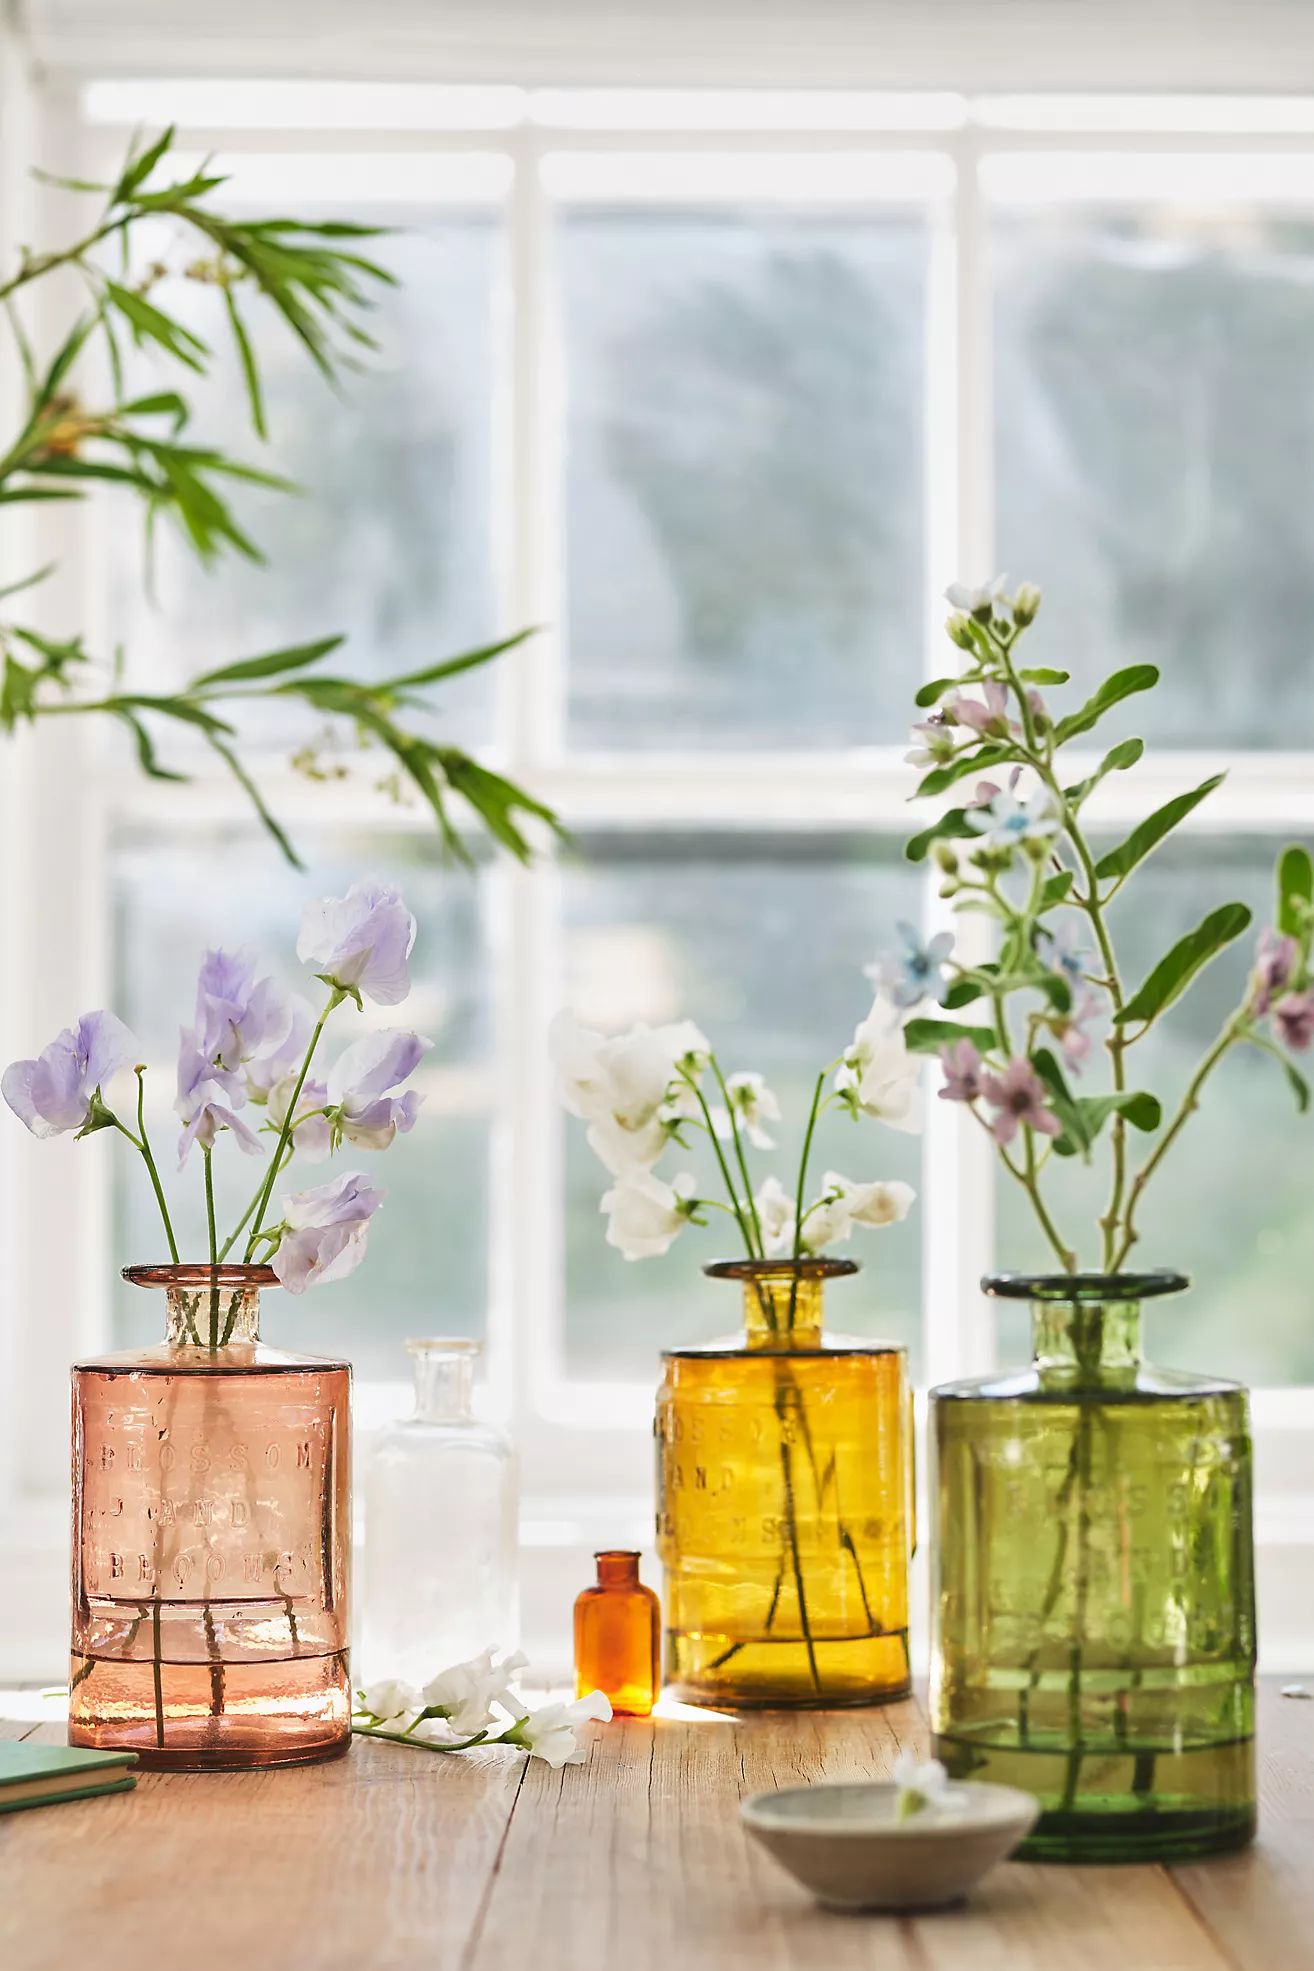 Blossom and Blooms Apothecary Jar | Anthropologie (US)